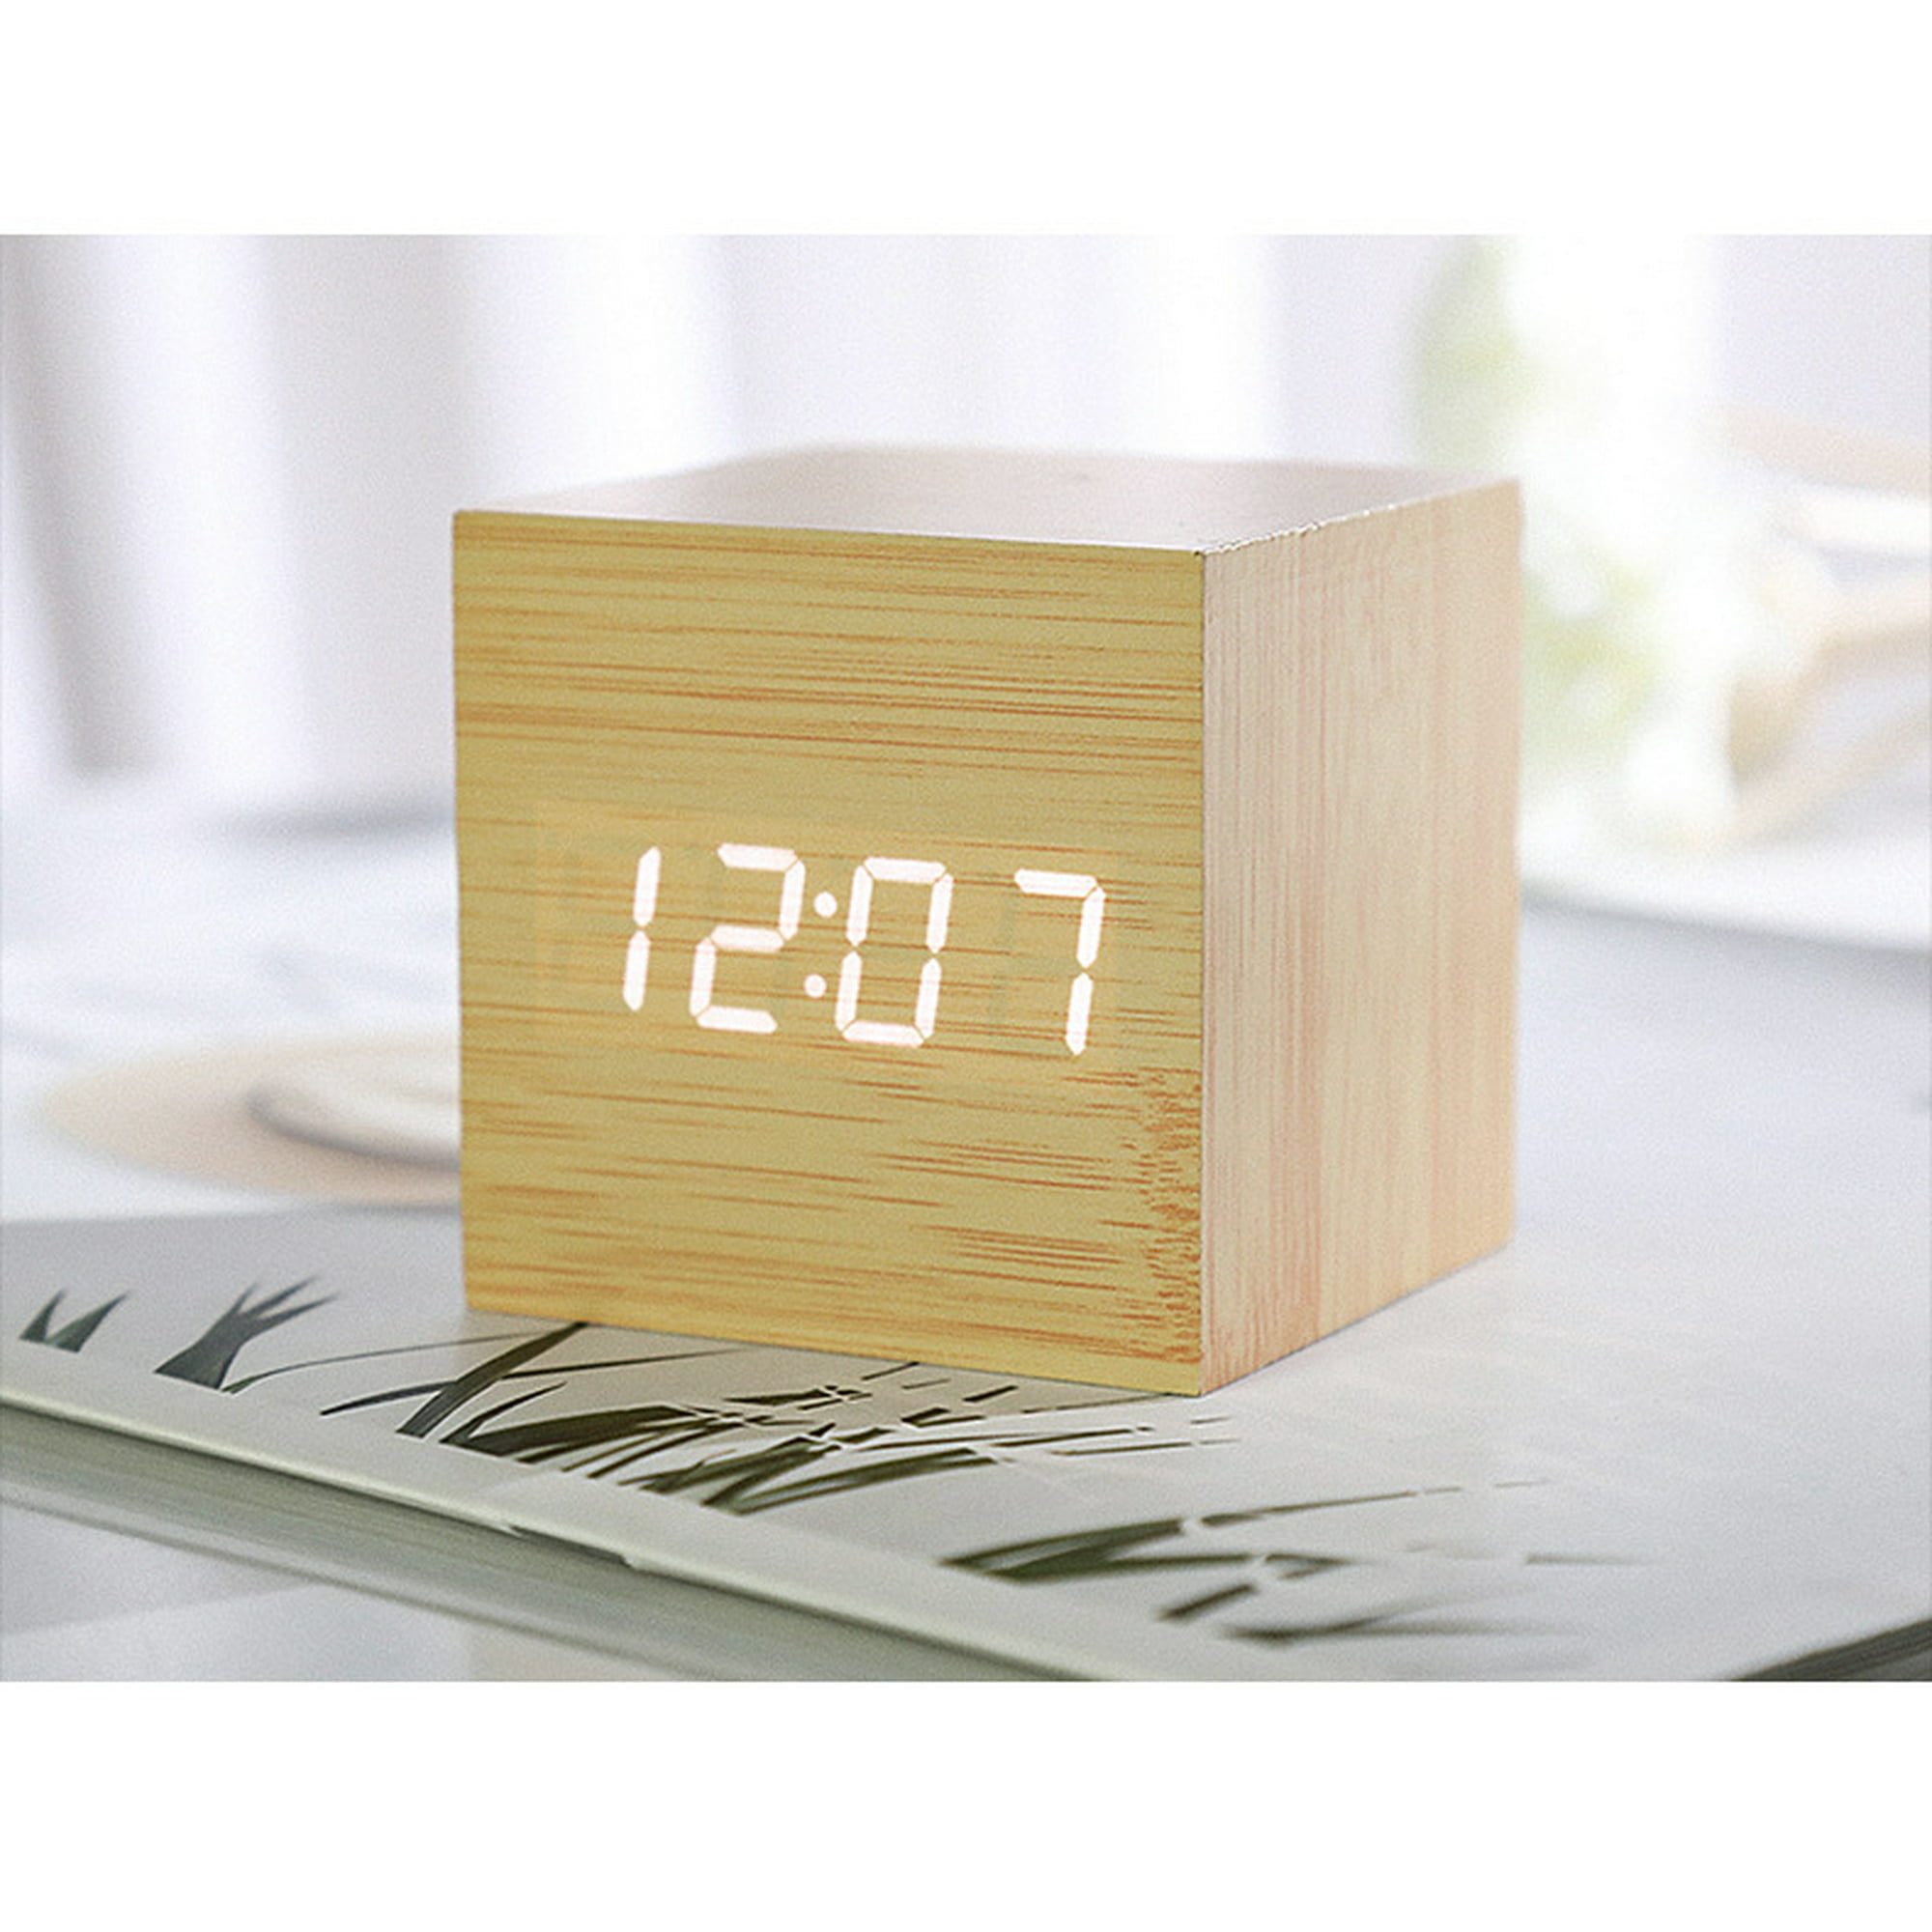 Wooden cube digital alarm clock with LED electronic time display Mini wooden  cube design table clock voice control timer calendar red light | Walmart  Canada